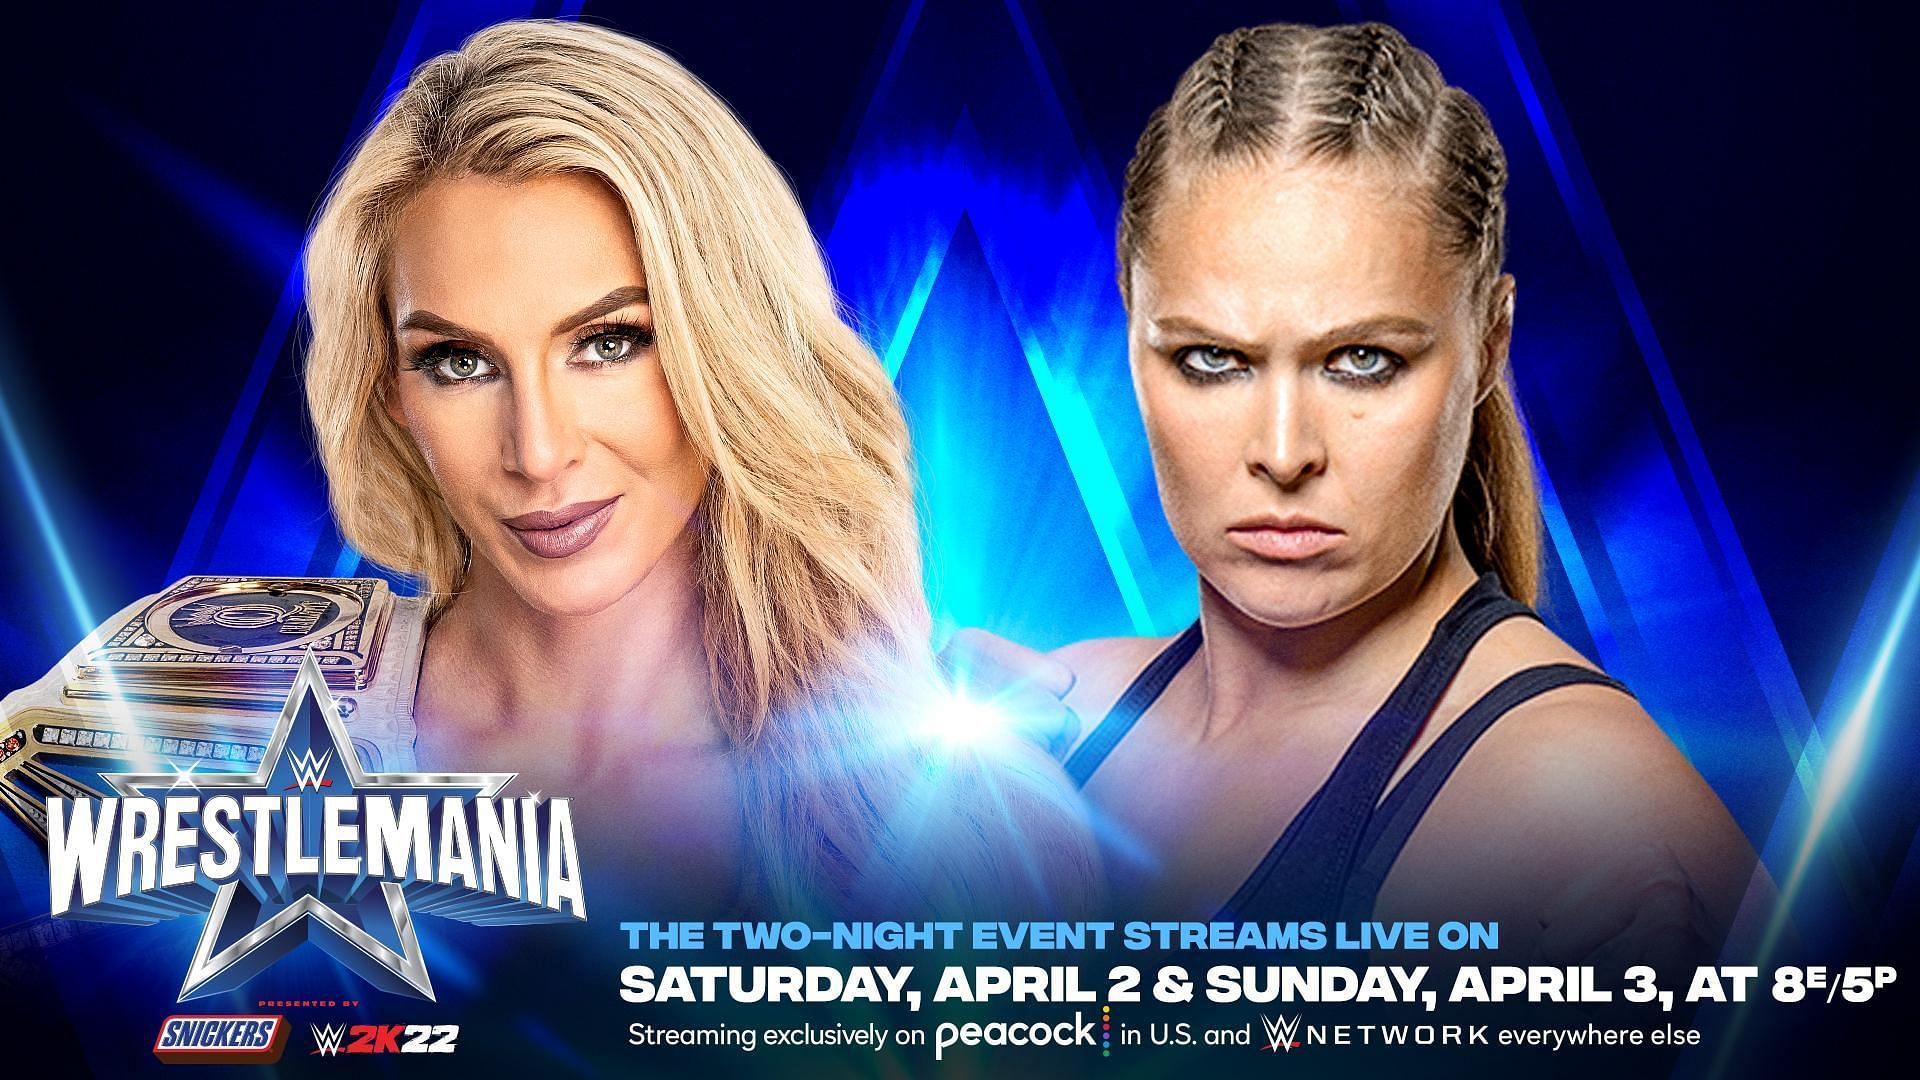 WrestleMania 38 Night 1 offers some intriguing matches for the biggest show of the year.